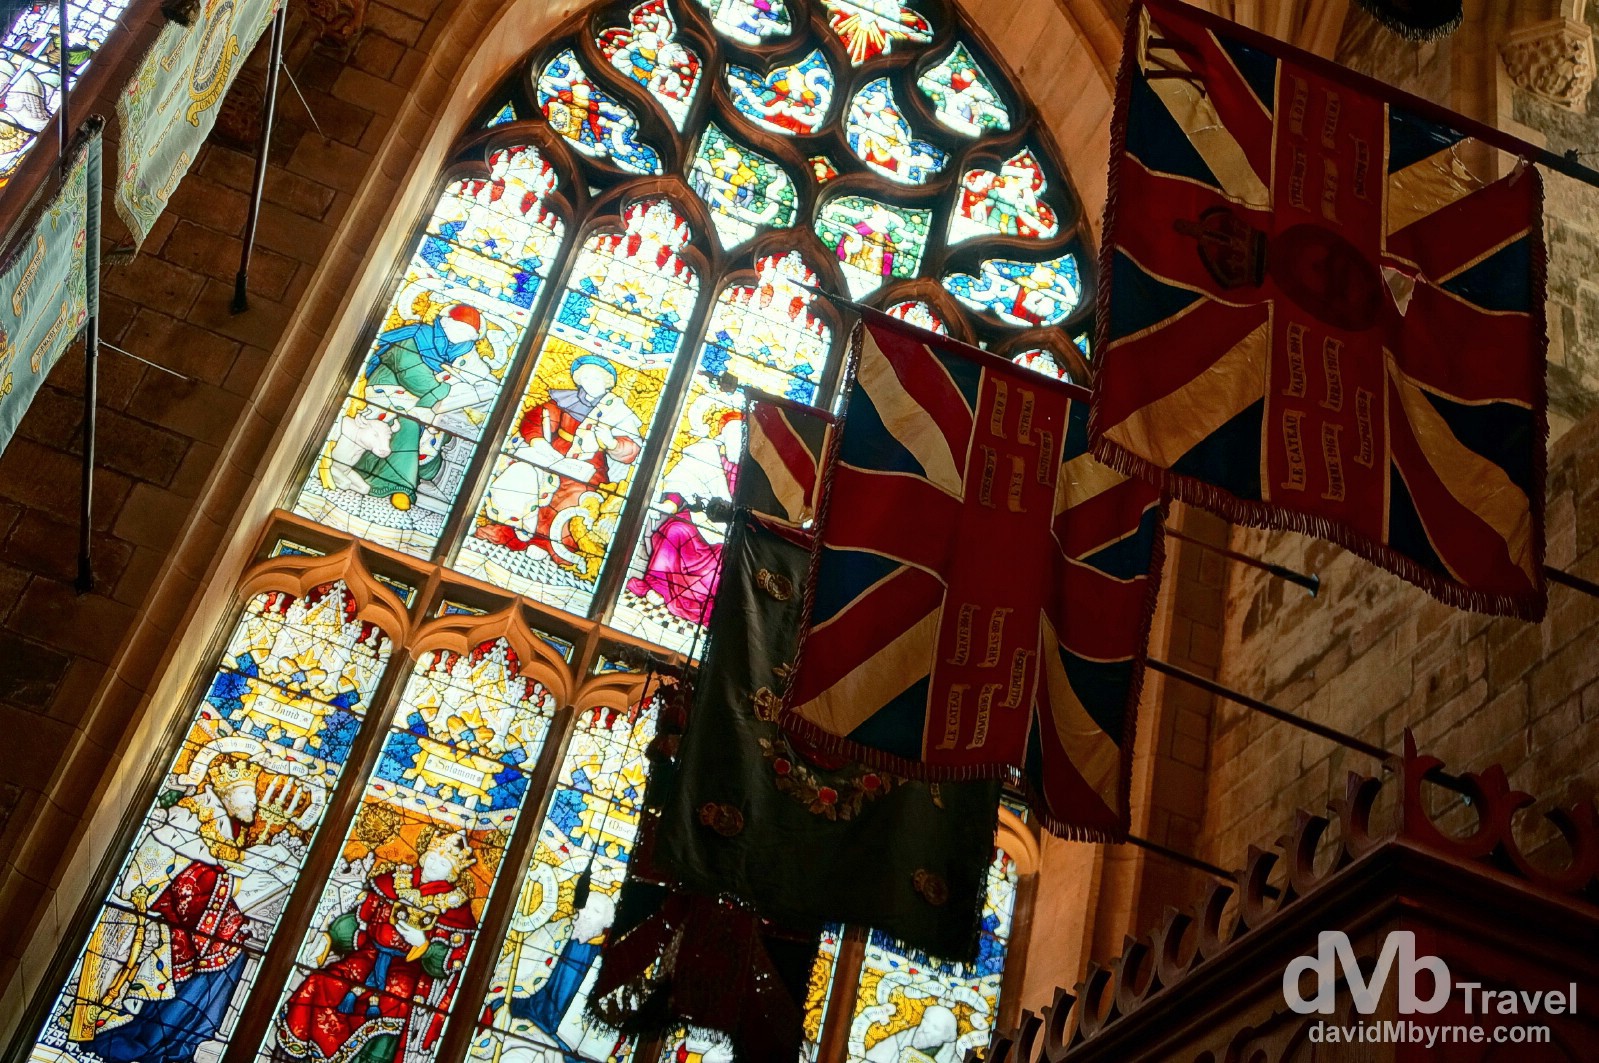 A section of the interior of St. Giles Cathedral in Edinburgh, Scotland. September 12, 2014.